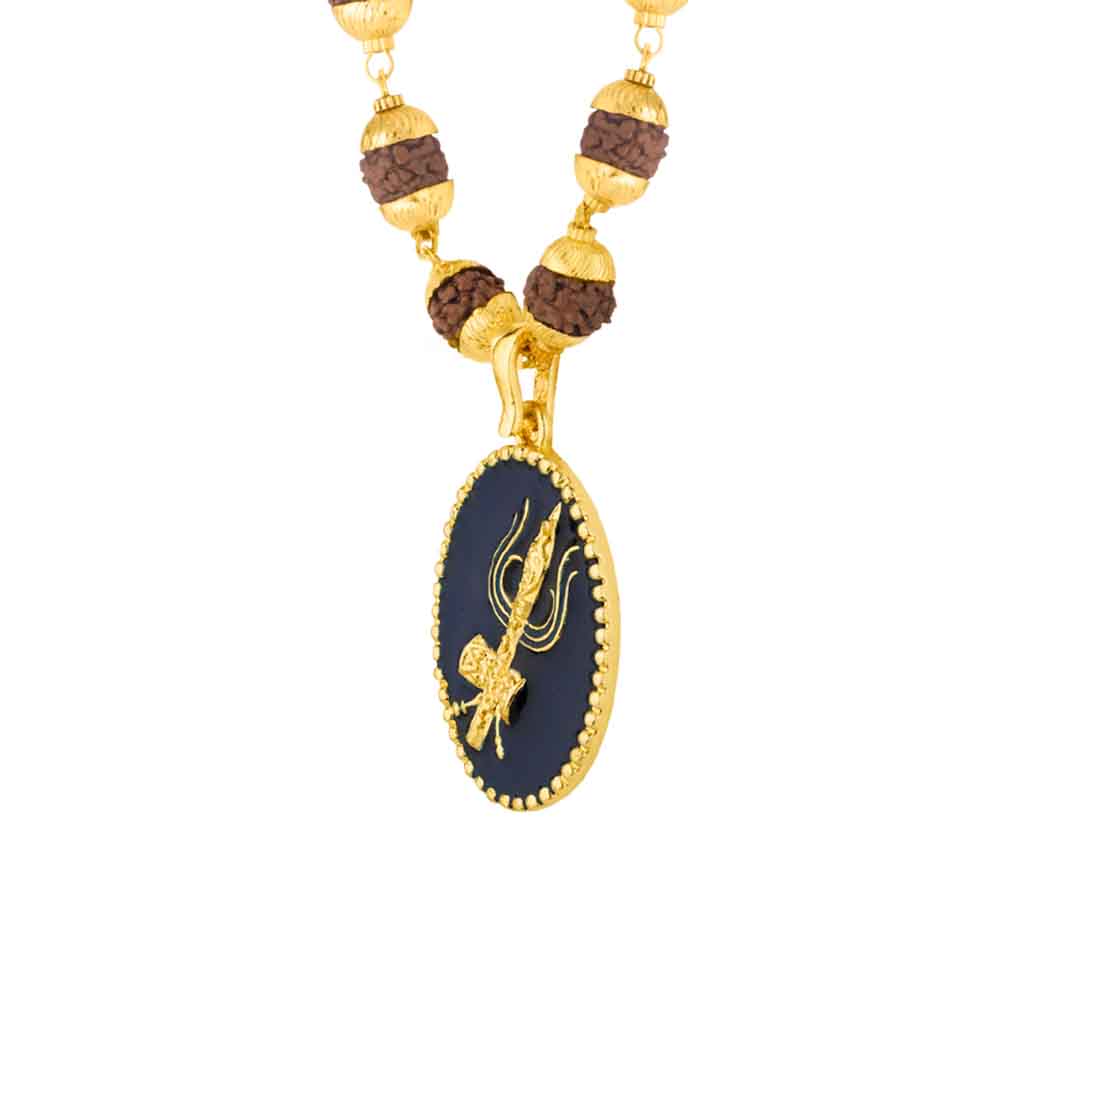 Gold Capped Rudraksha and Trident Pendant Necklace